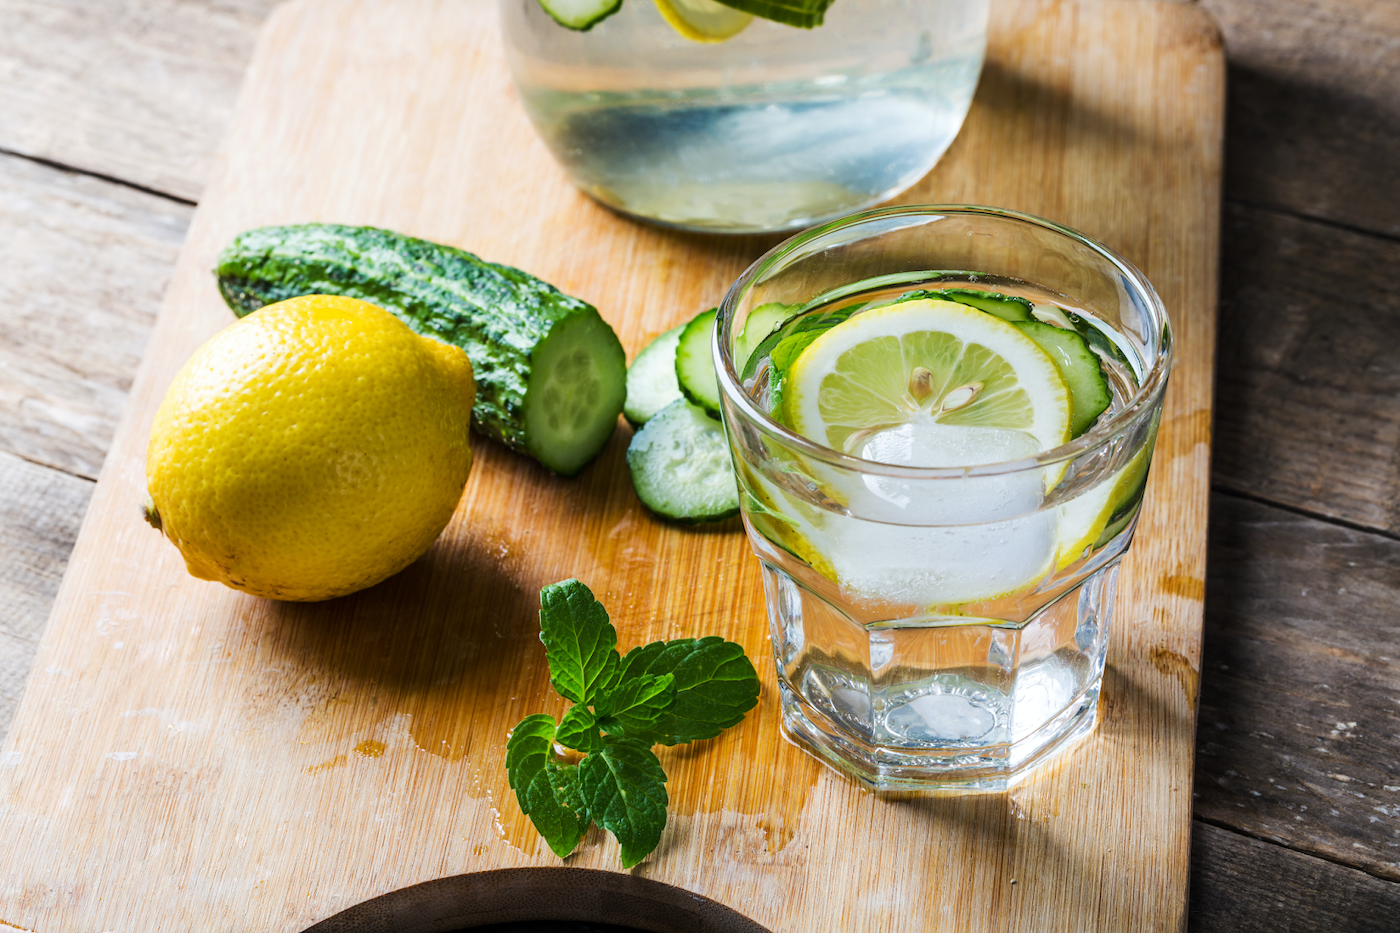 A cucumber and lemon infused glass of water for the Splash Tears eye drops blog